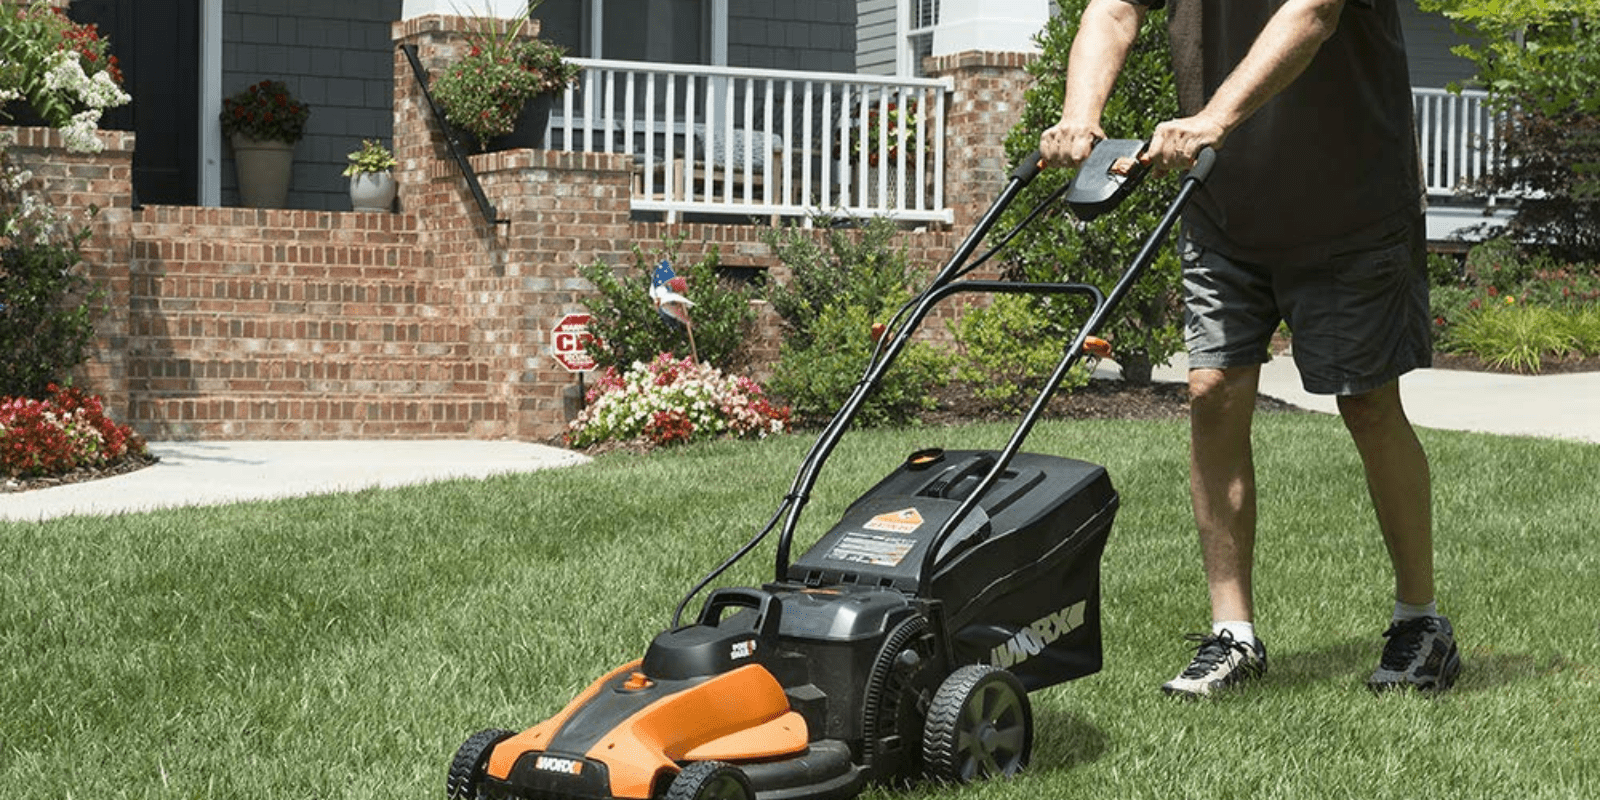 Best lawn mowers for small yards on amazon